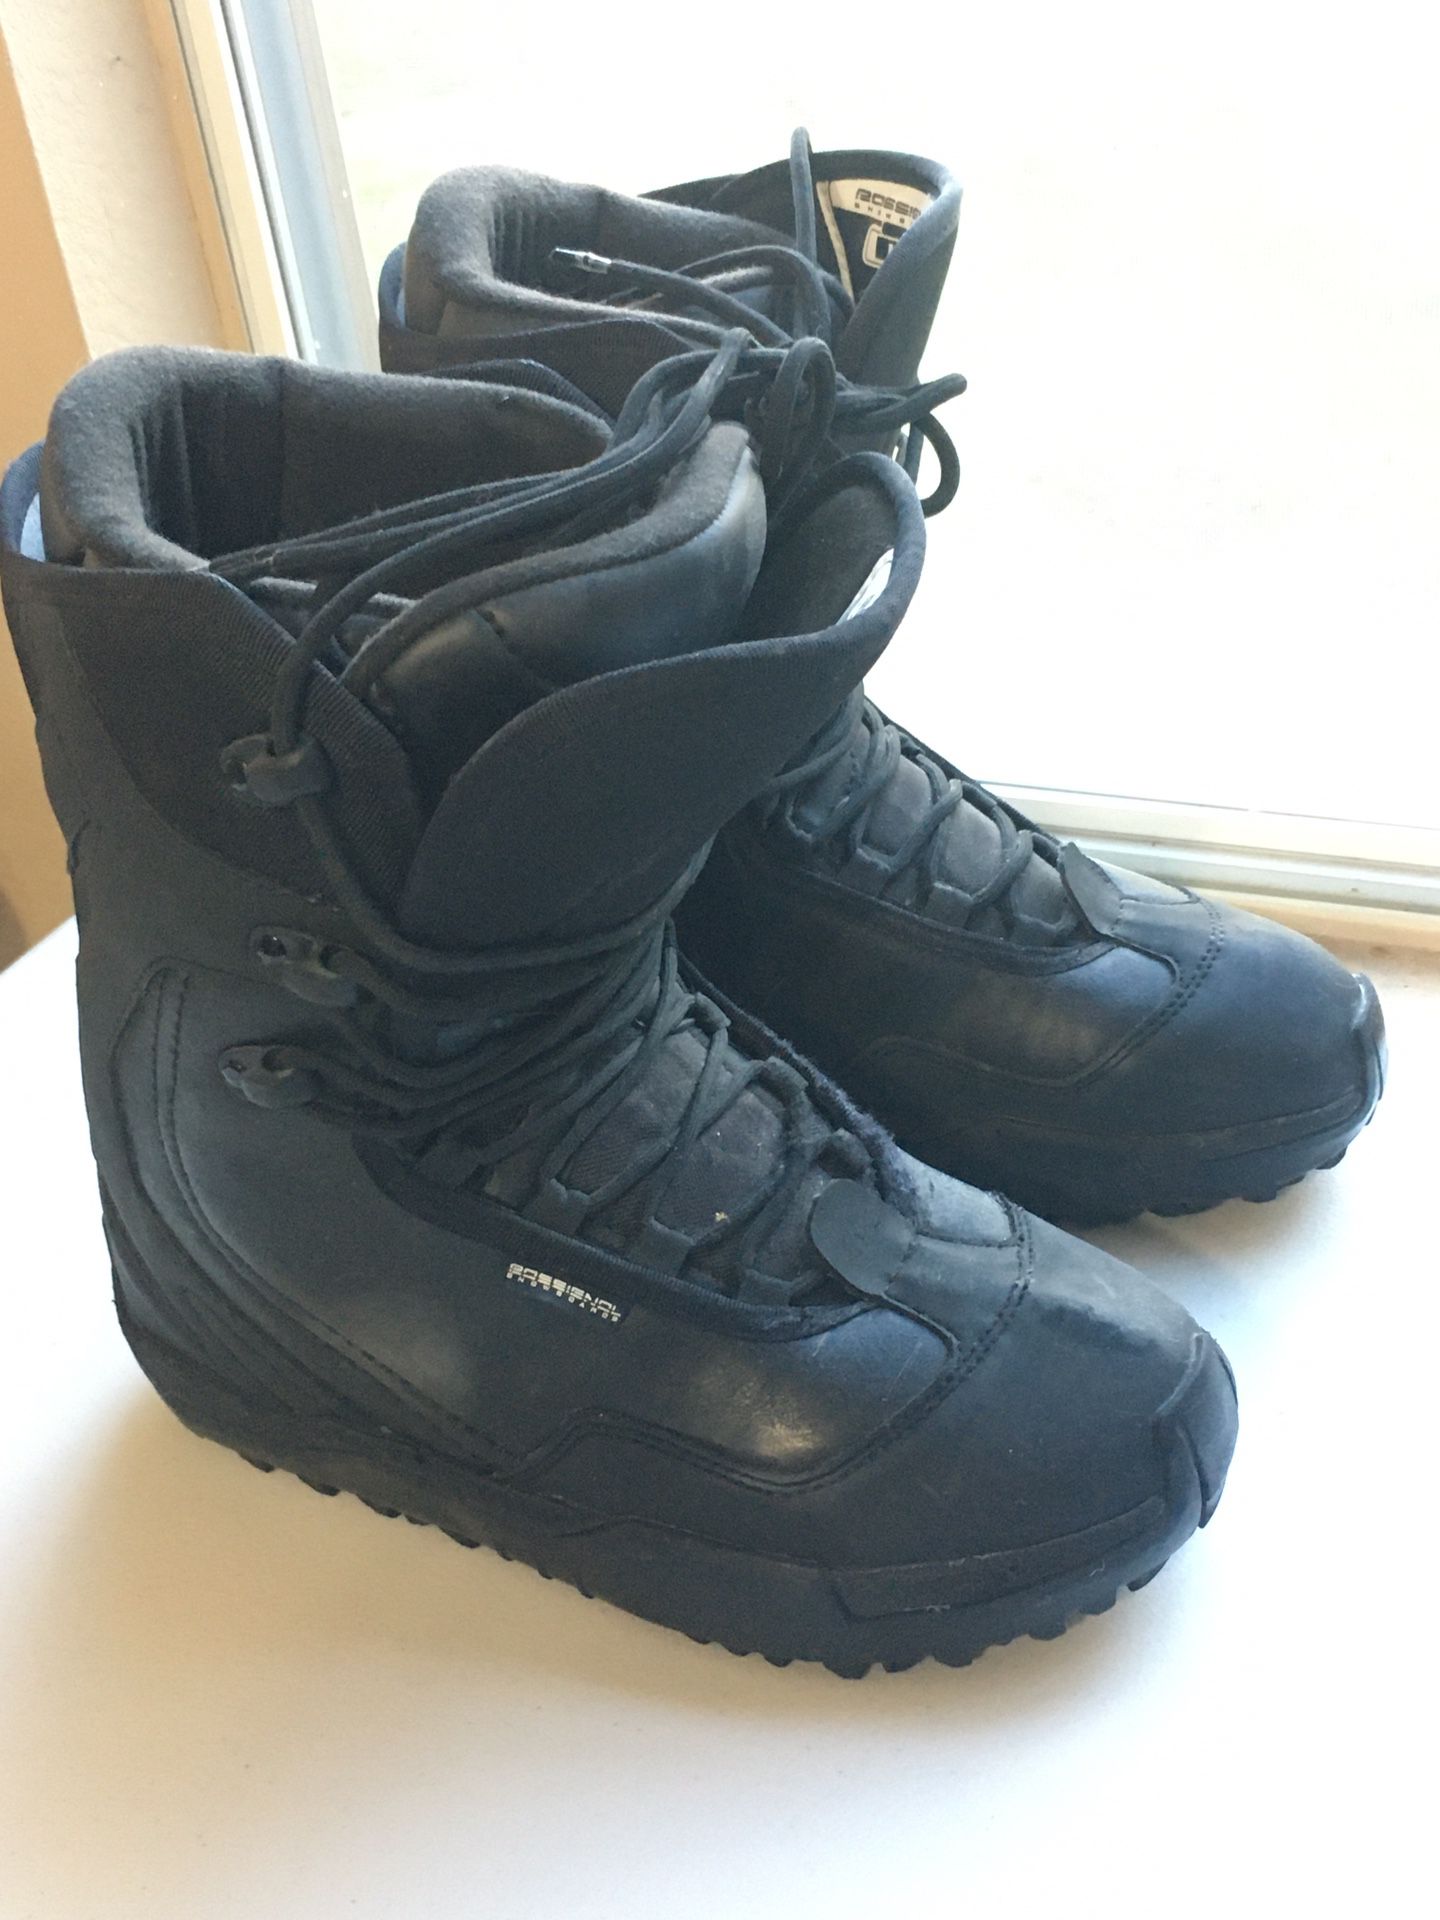 Rossignol snowboard boots, size 9.